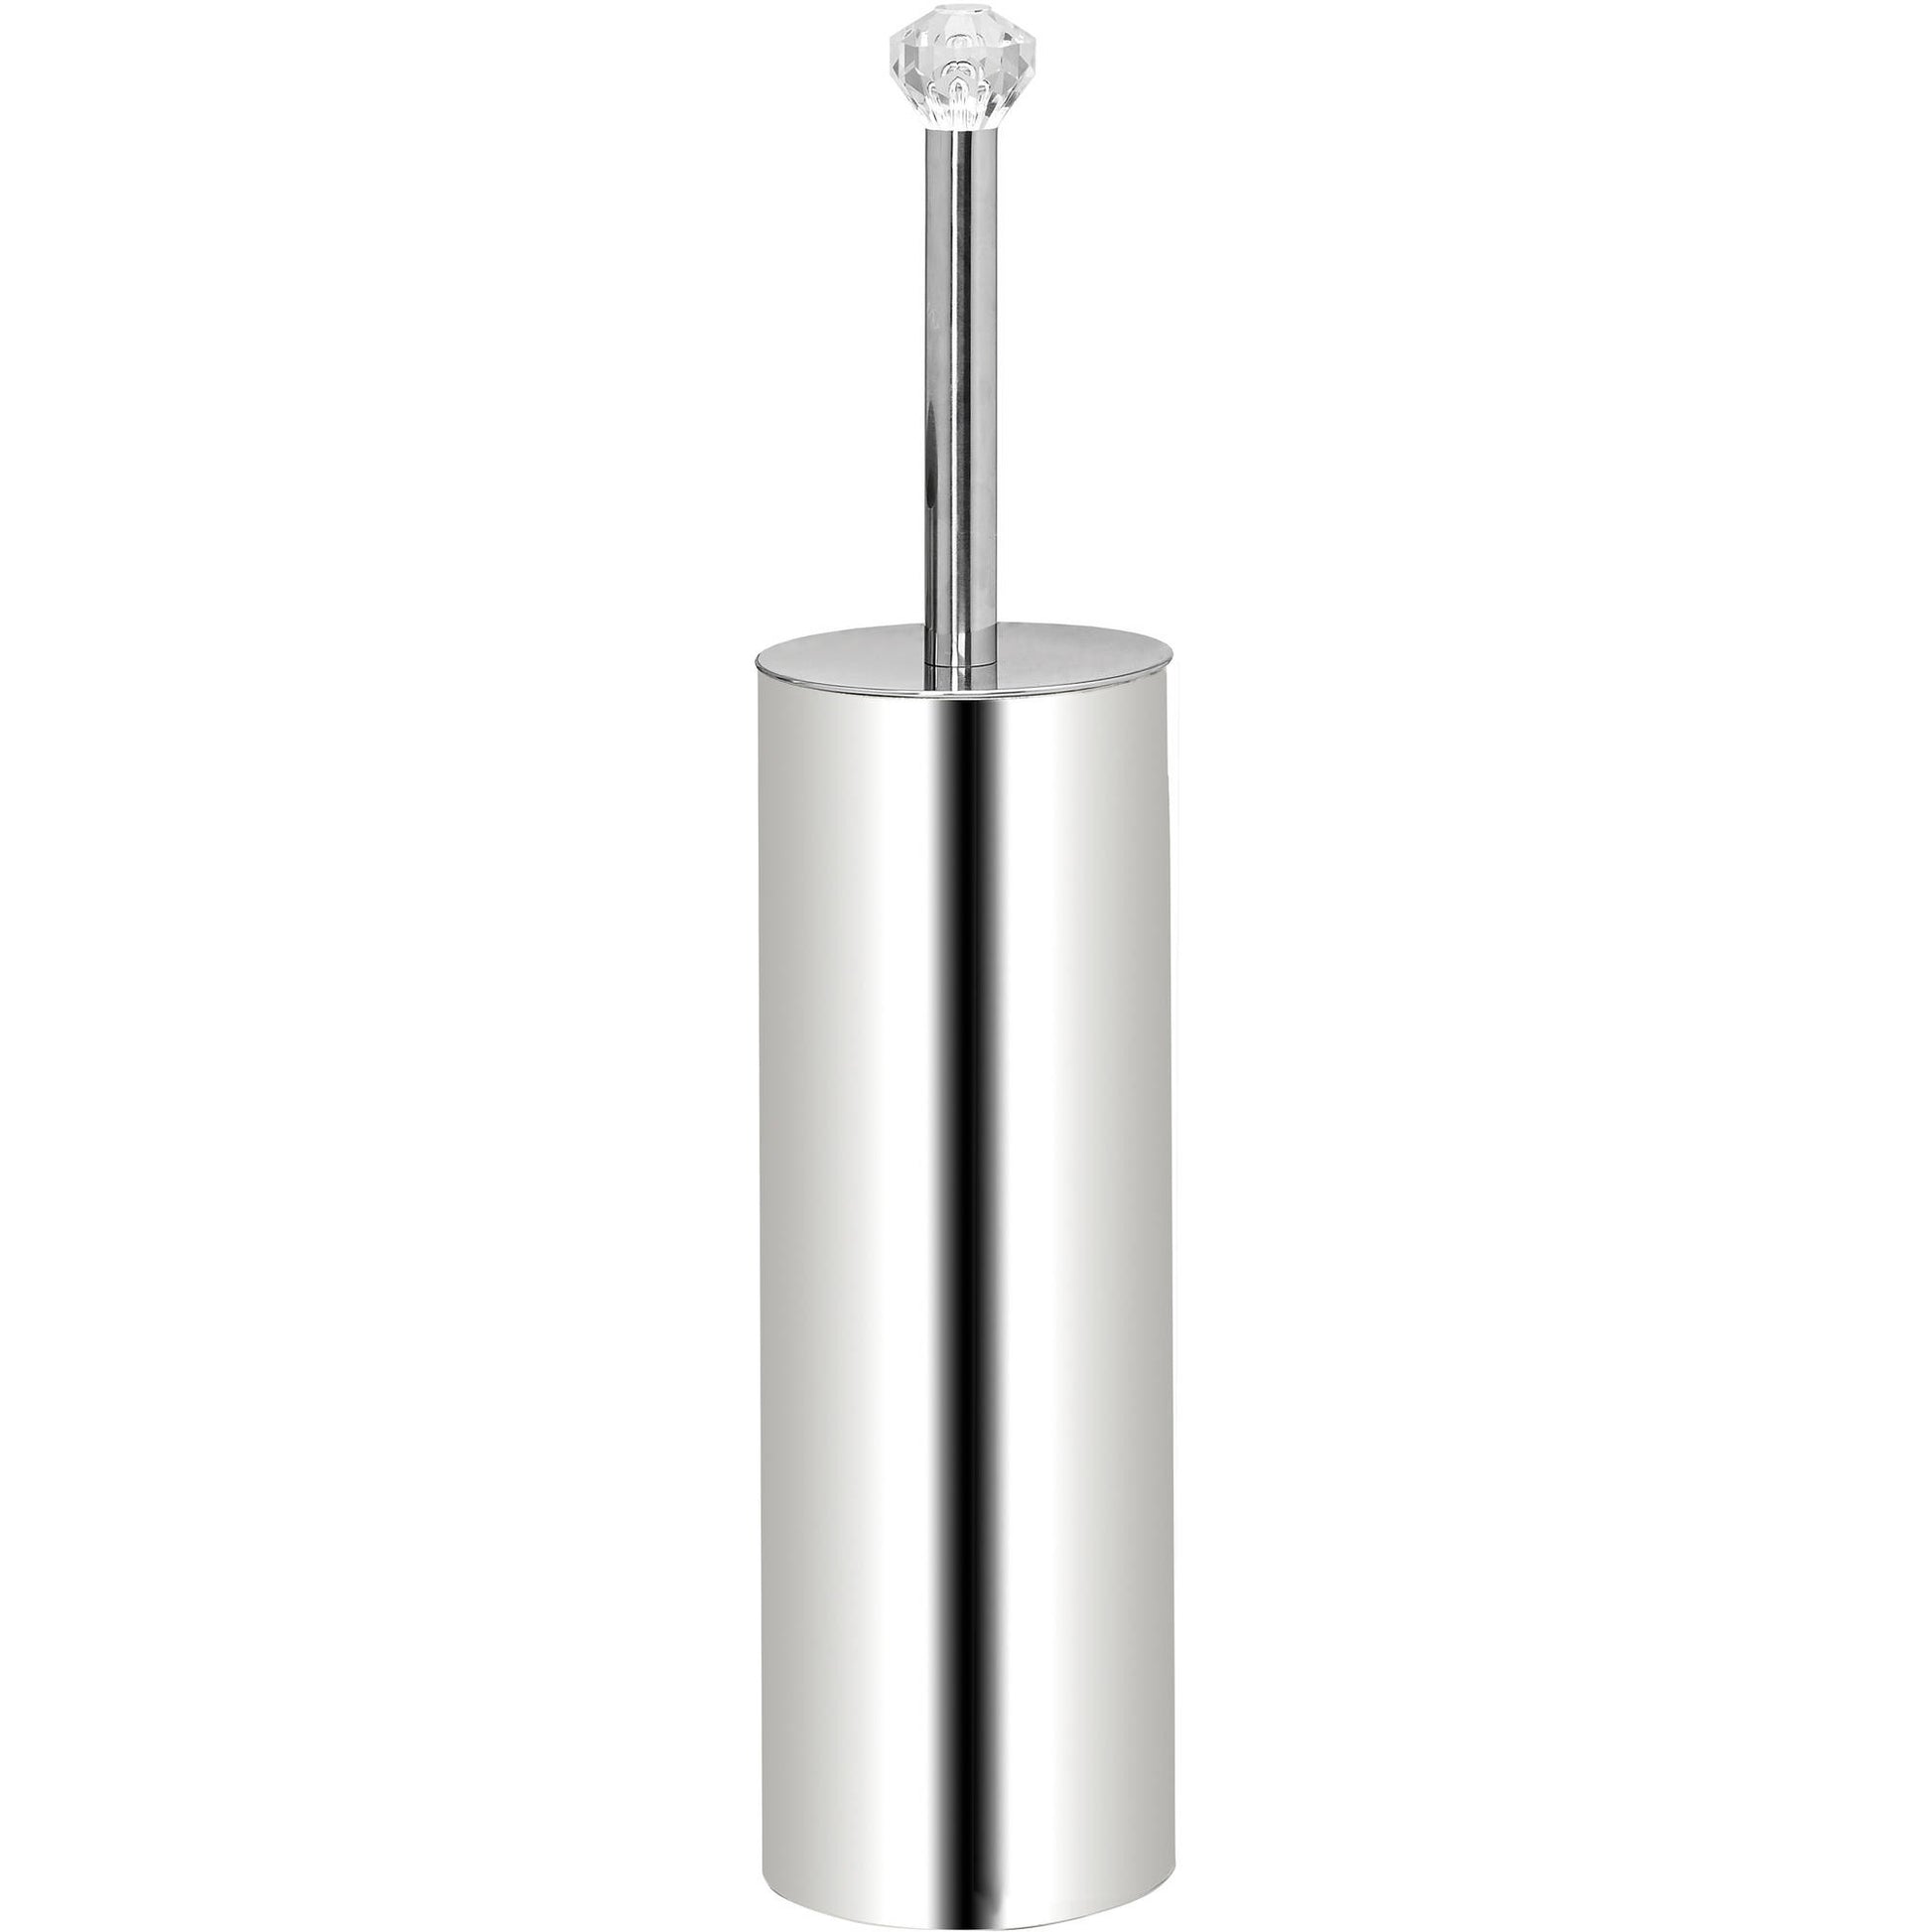 Bath Bliss Casting Toilet Brush with Crystal Ball Tip in Stainless Steel, Silver